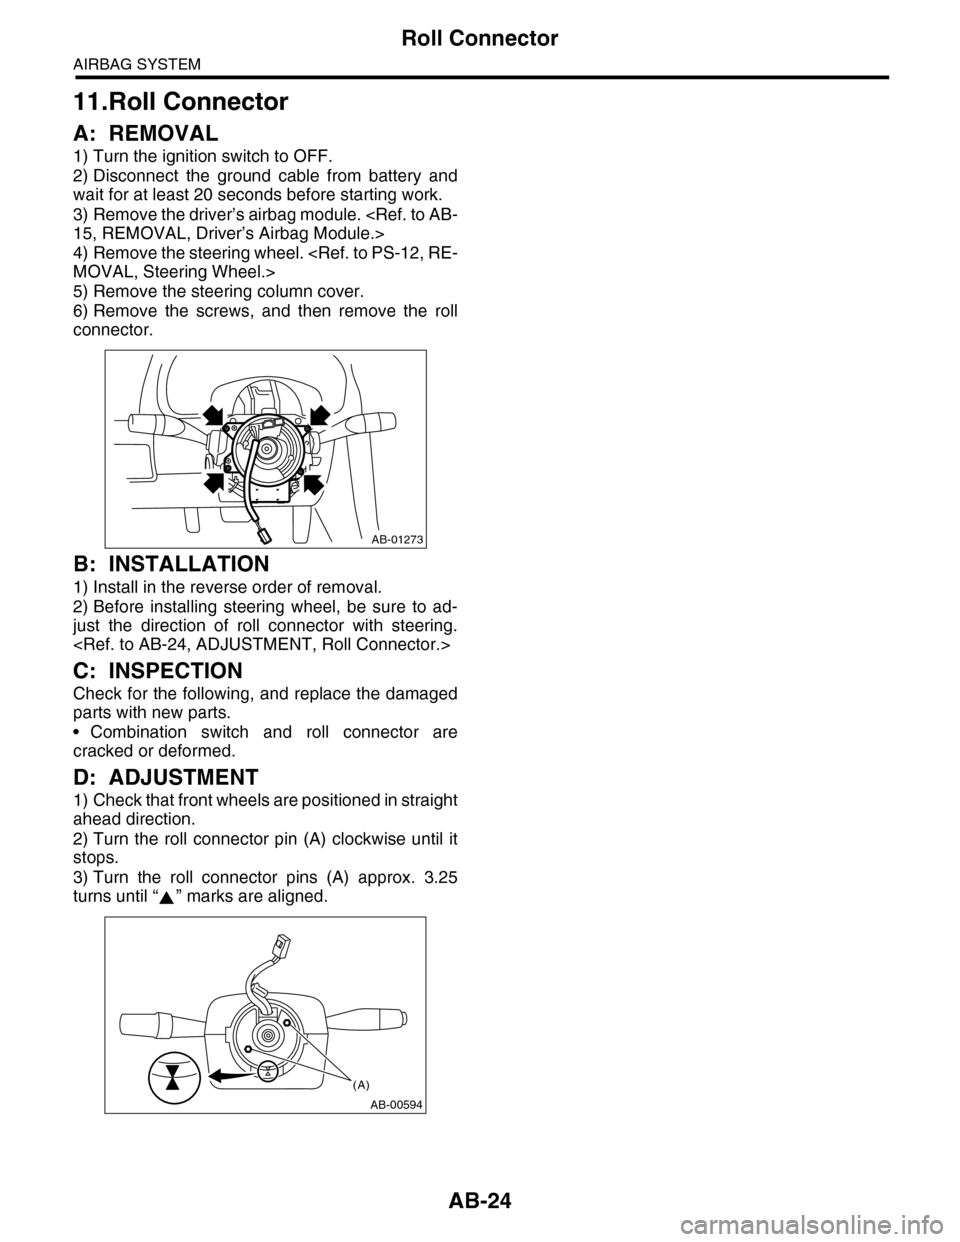 SUBARU TRIBECA 2009 1.G Service Workshop Manual AB-24
Roll Connector
AIRBAG SYSTEM
11.Roll Connector
A: REMOVAL
1) Turn the ignition switch to OFF.
2) Disconnect  the  ground  cable  from  battery  and
wait for at least 20 seconds before starting w